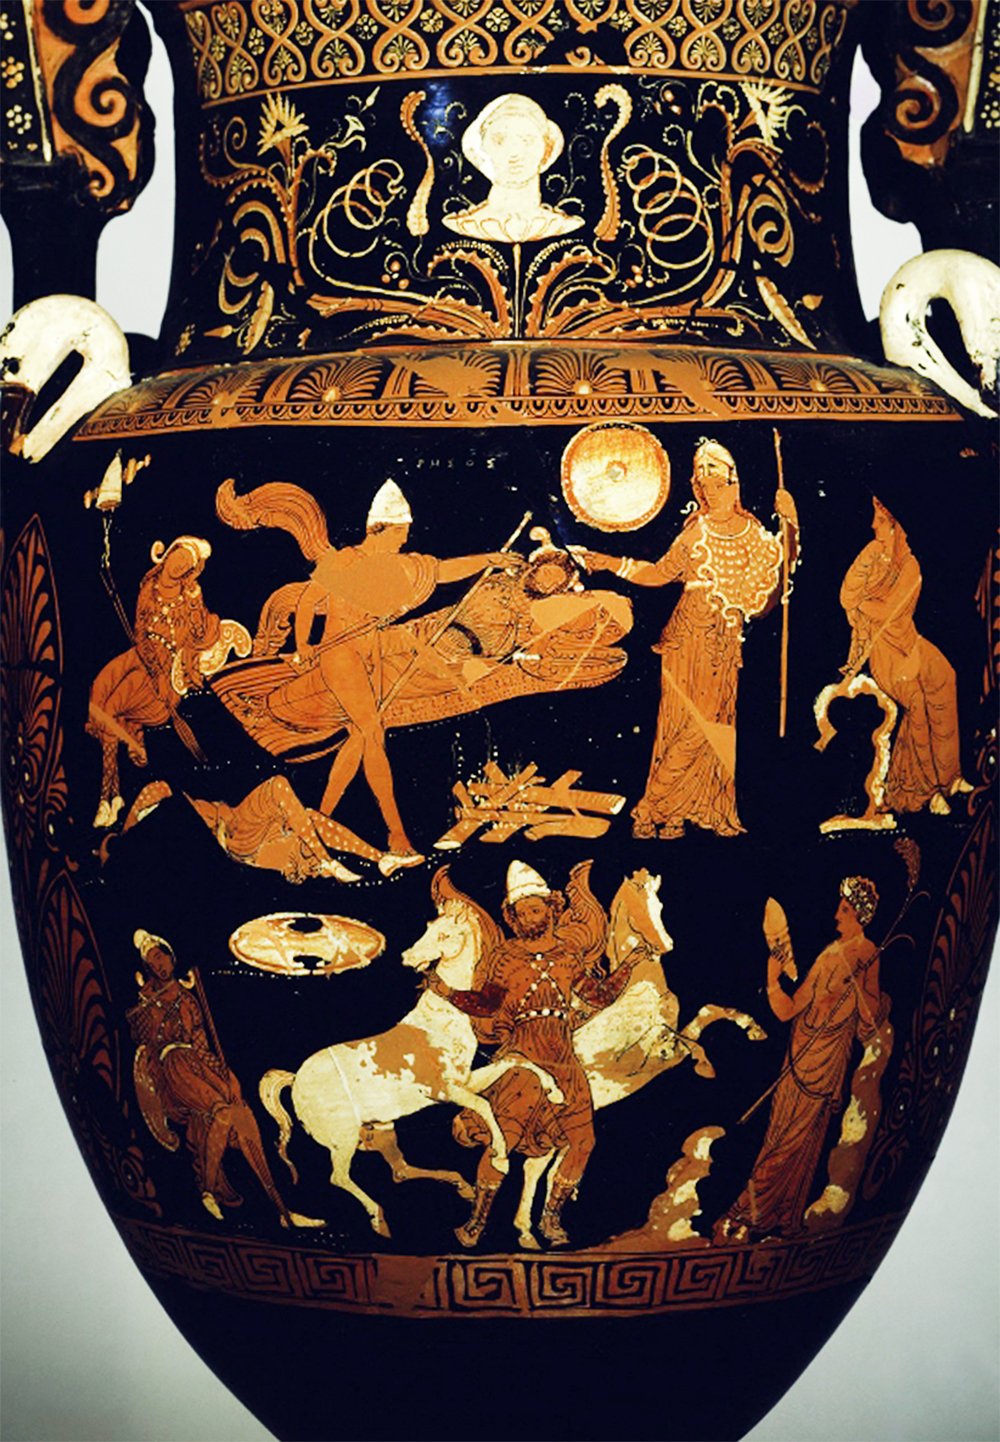 Detail of an ancient Greek vase depicting Odysseus and Diomedes stealing the horses of Rhesos, surrounded by intricate patterns and other mythological figures.